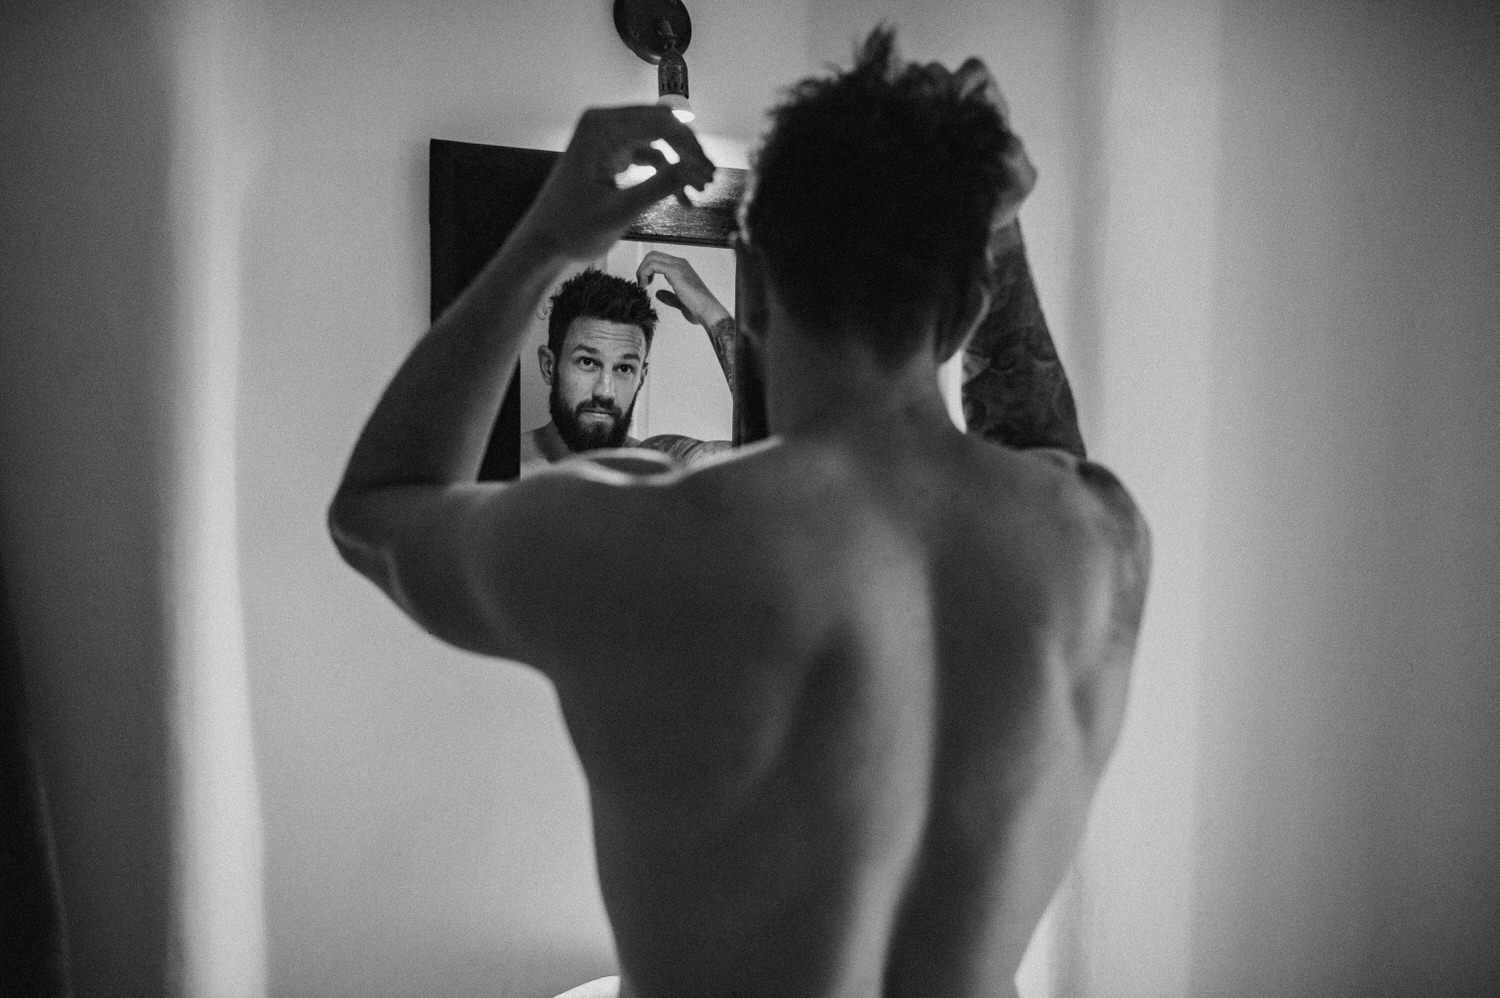 Mykonos wedding photographer: black and white portrait of shirtless groom looking in the mirror fixing his hair.